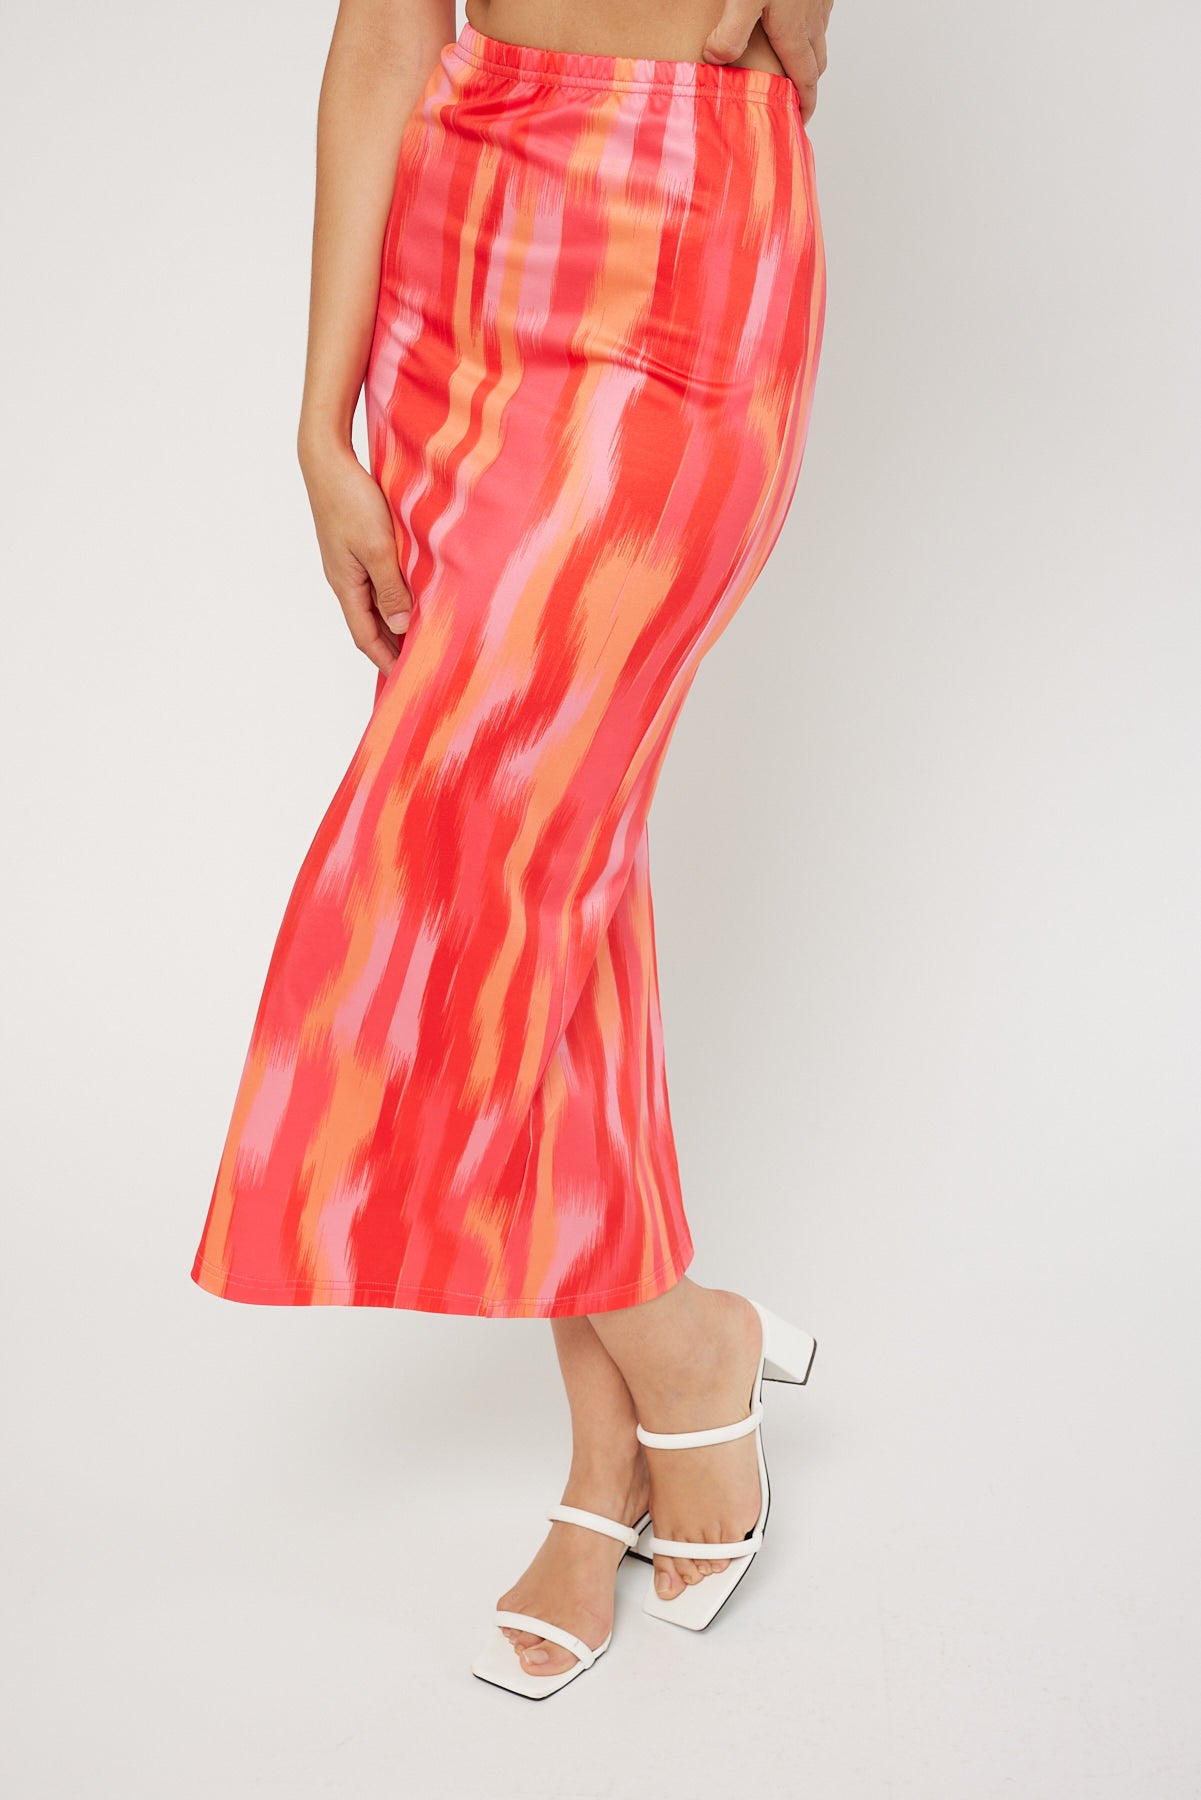 Luck & Trouble Coral Flamingo Midi Skirt Pink Print